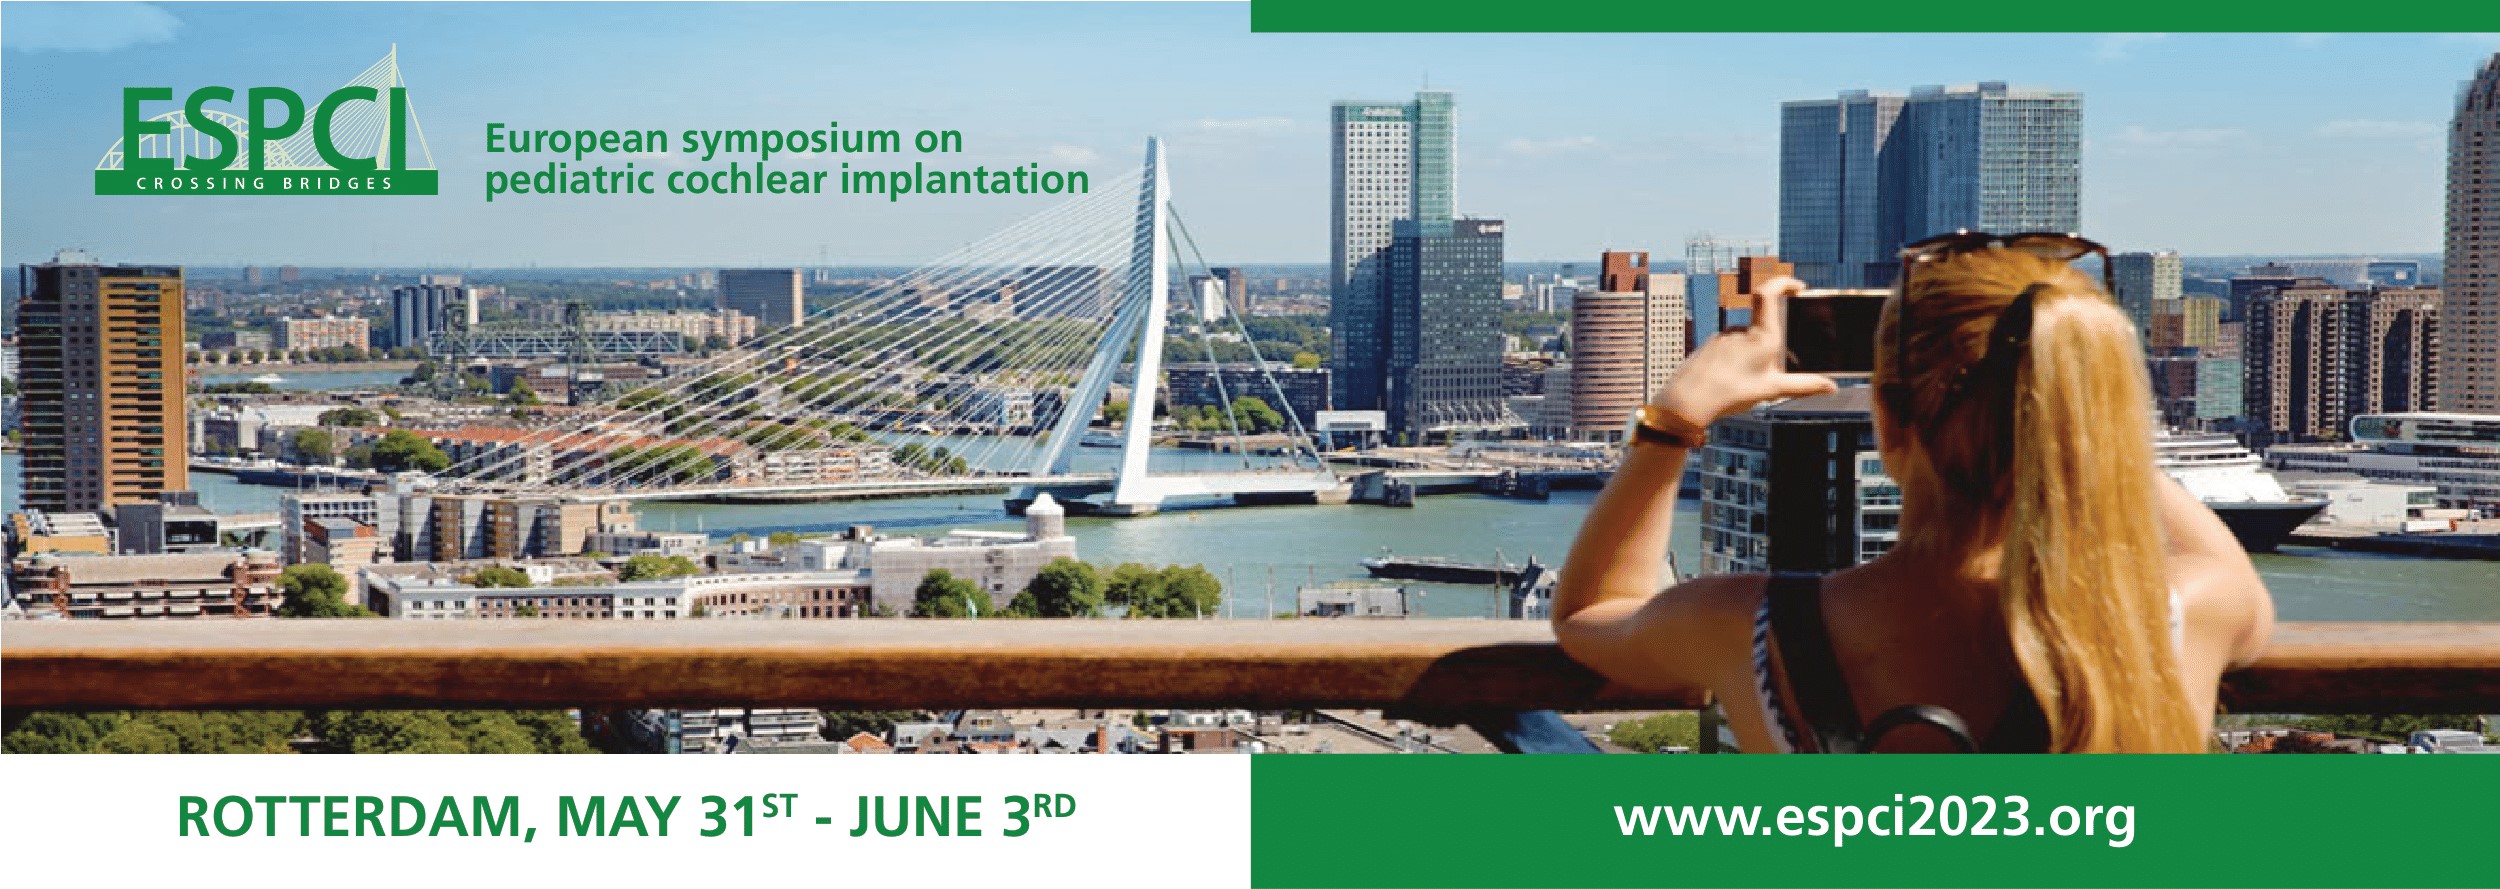 European Symposium for Paediatric Cochlear Implantation: ESPCI 2023! In Rotterdam: May 31-June3